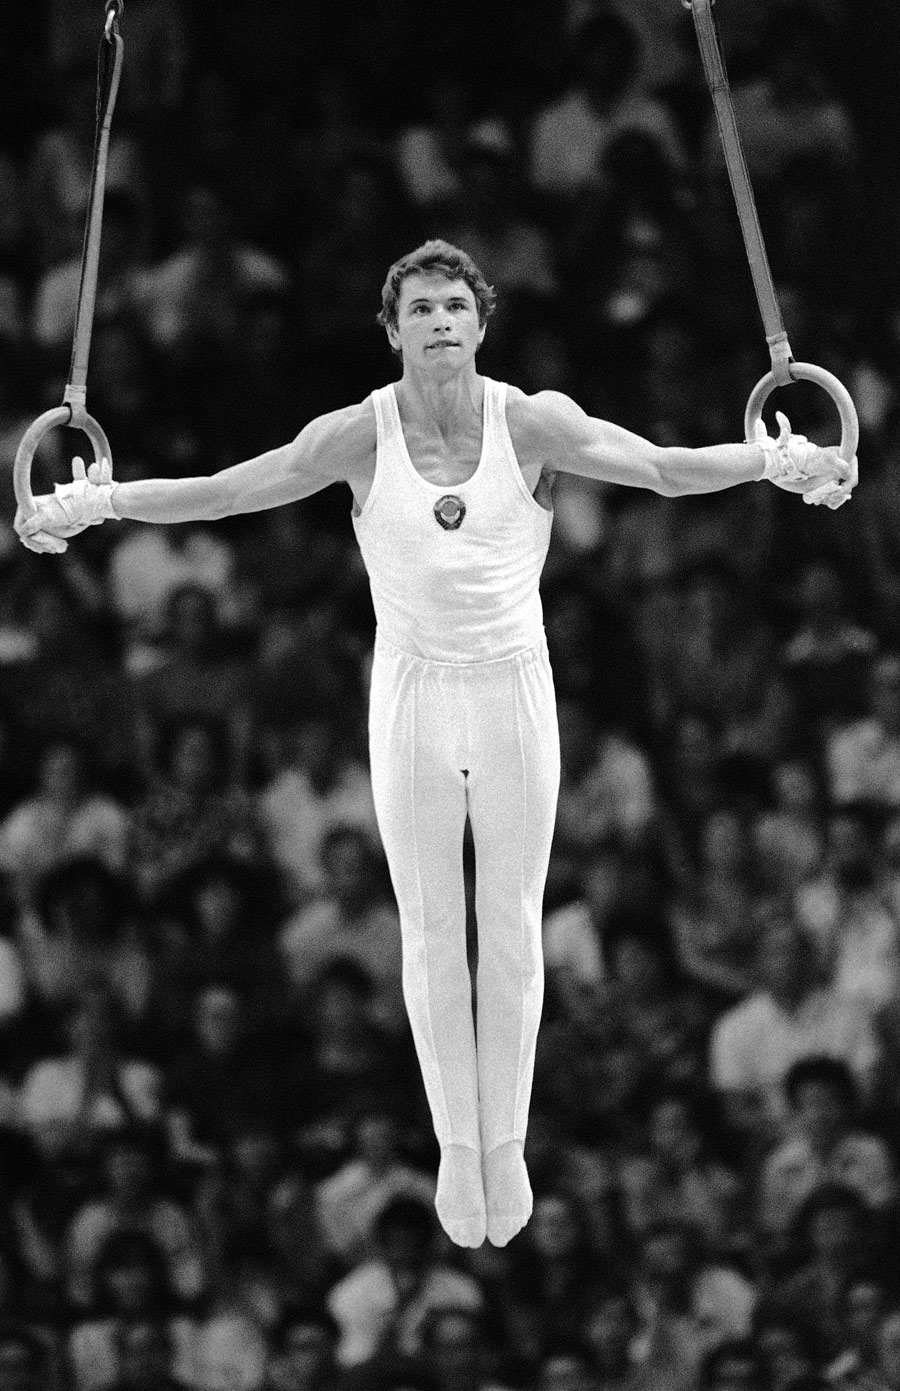 Alexander Dityatin won a medal in each of the eight gymnastics events, including three golds, and in so doing became the first athlete to win eight medals at an Olympics